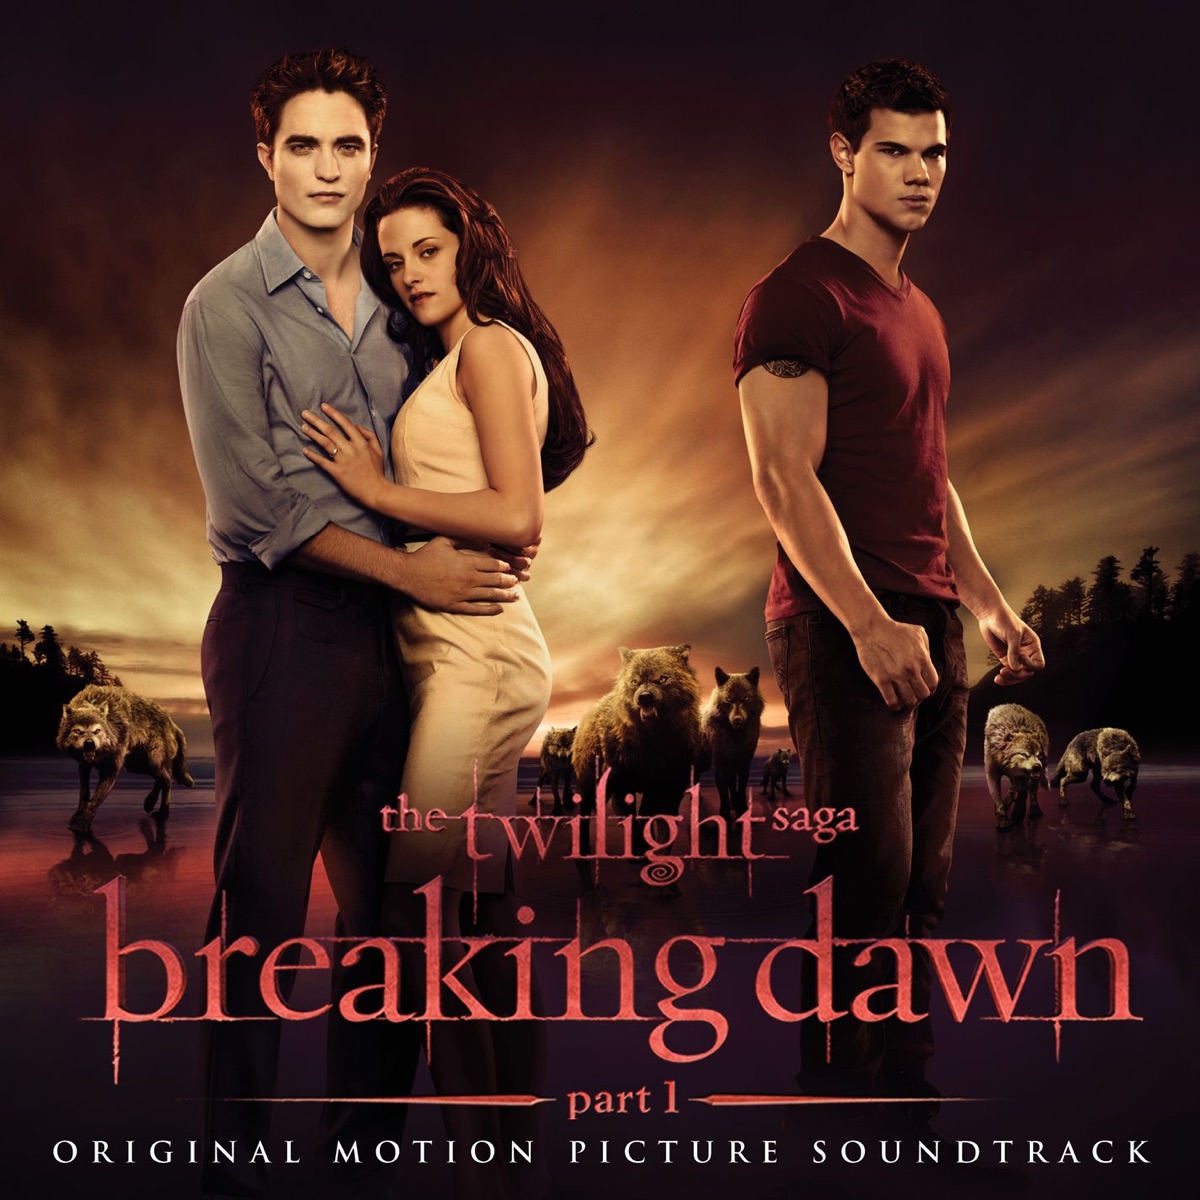 The Twilight Saga: Breaking Dawn - Pt. 1 (Original Motion Picture Soundtrack)  by Various Artists on Apple Music